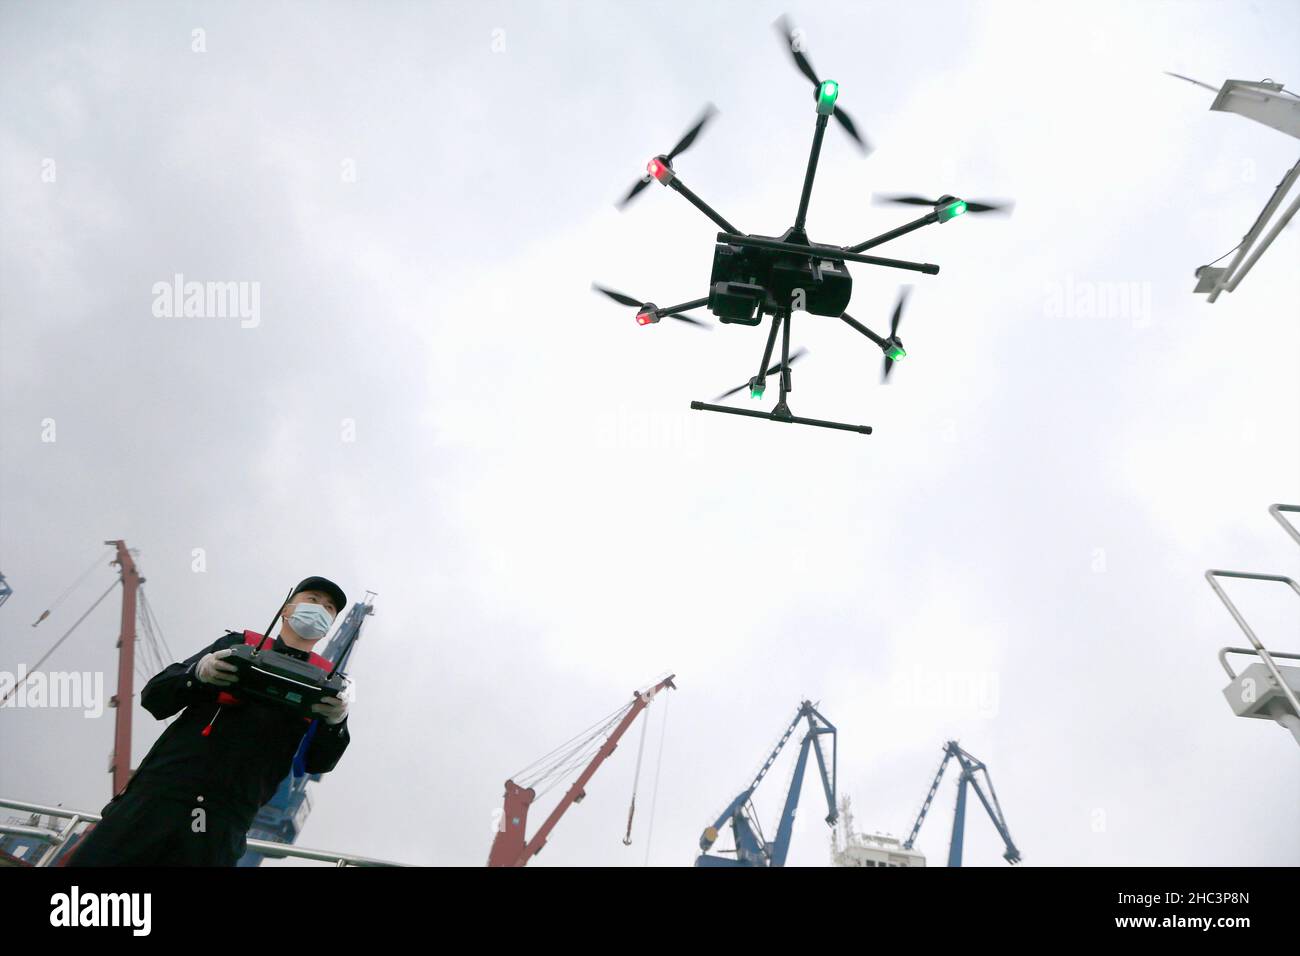 NANJING, CHINA - DECEMBER 24, 2021 - A police officer operating a police drone at an entry border control station prepares to carry out an aerial call Stock Photo